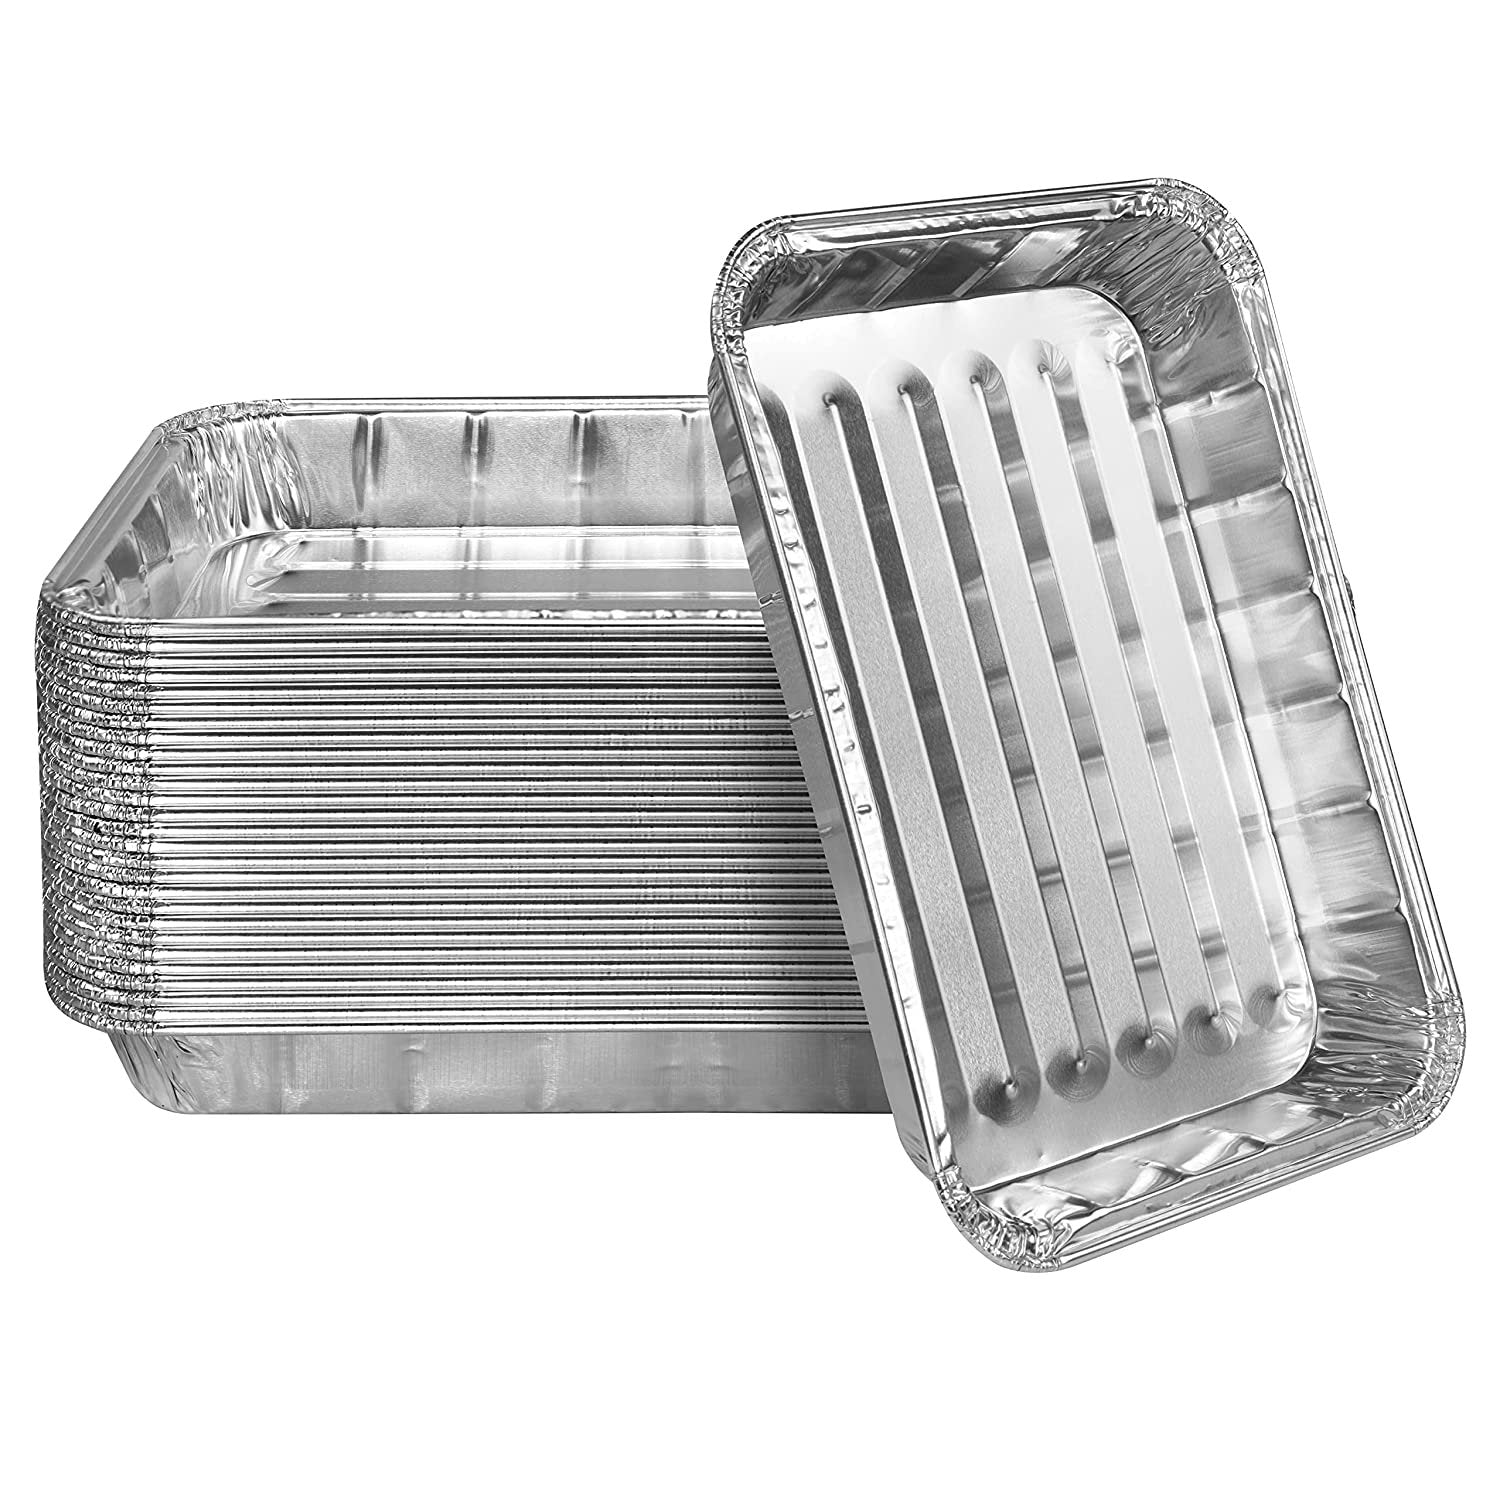 10 X Large Disposable Aluminium Baking Roasting Foil Trays with Lid  Containers for Broiling Cooking Food Storage